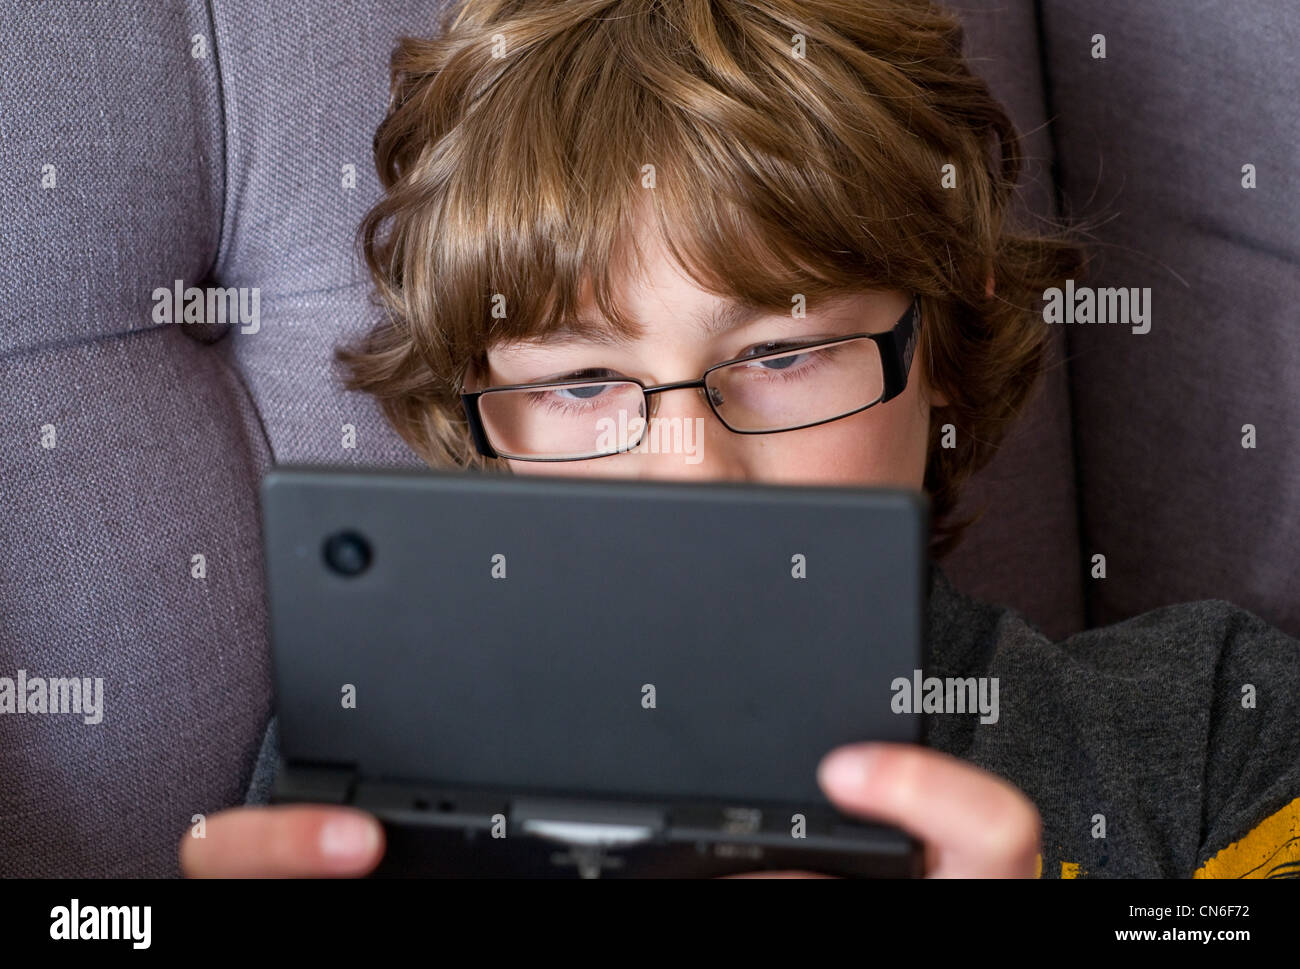 A boy playing on a hand-held Nintendo DSi games console Stock Photo